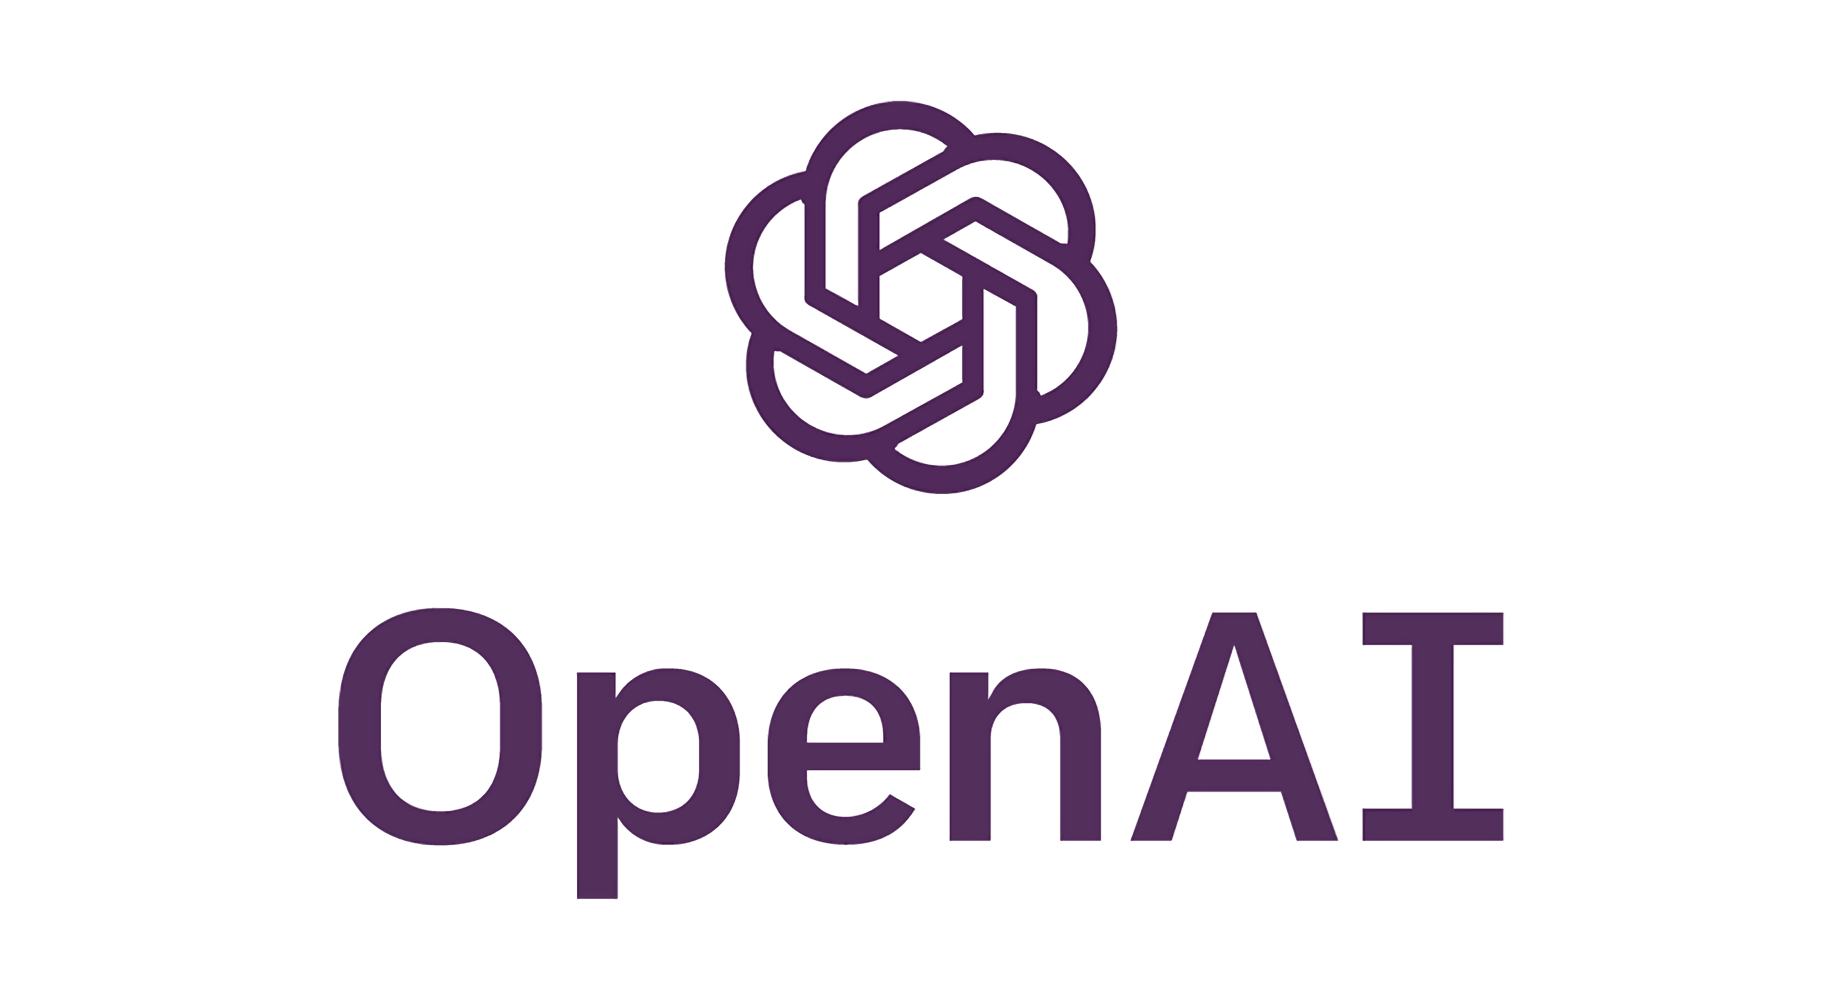 All About OpenAi